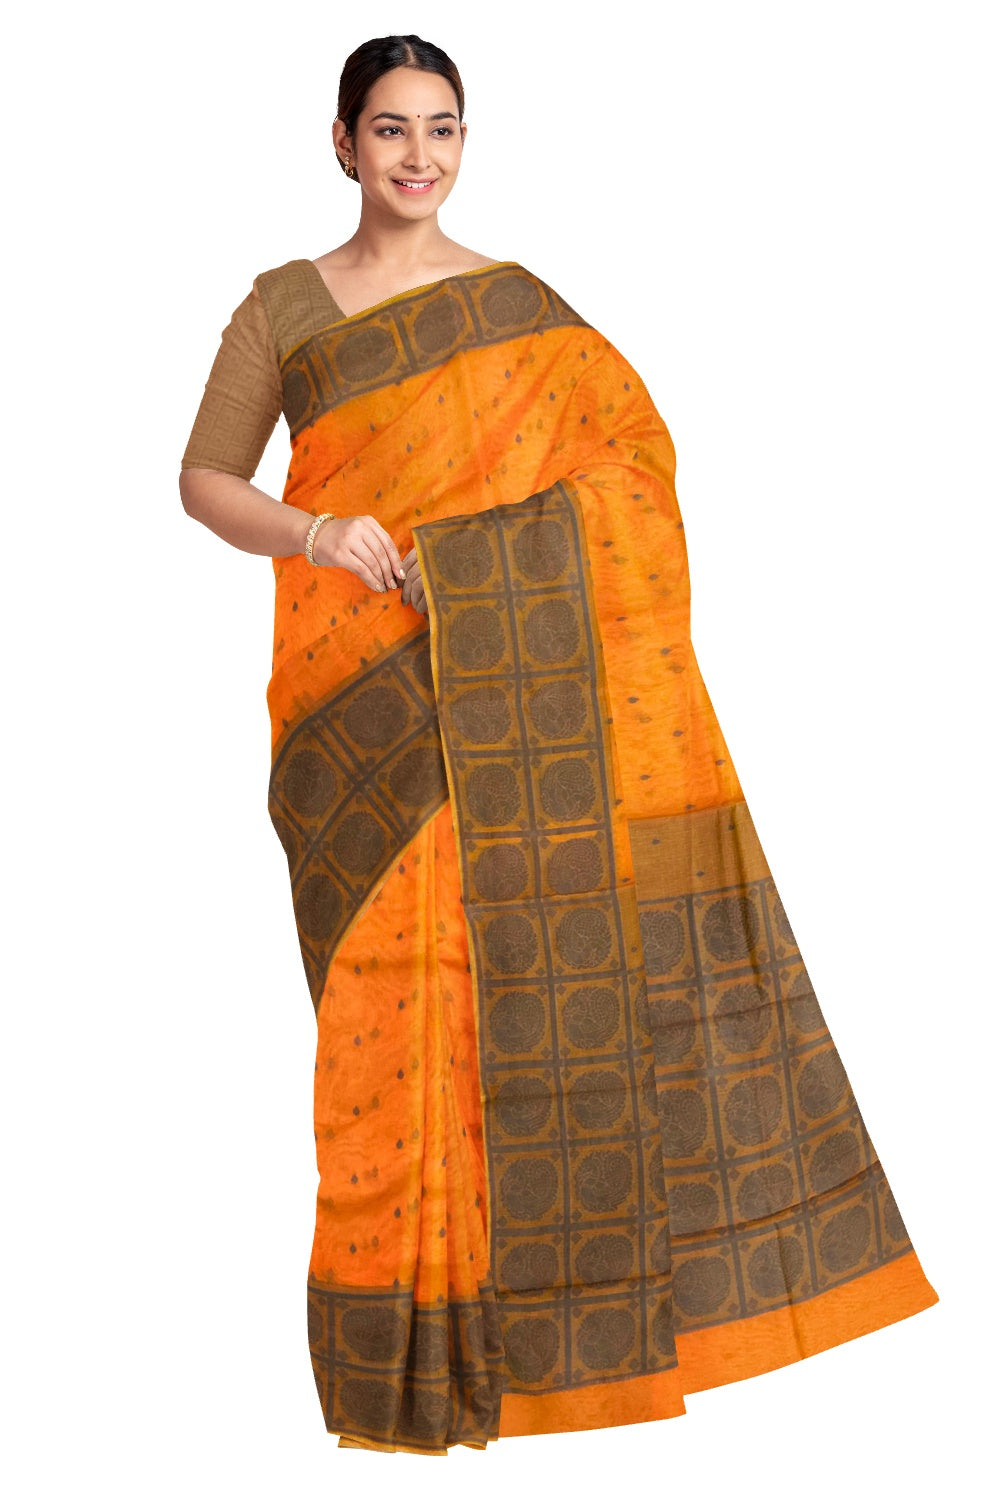 Southloom Sico Gadwal Semi Silk Saree in Orange and Grey with Peacock Motifs (Blouse Piece with Work)